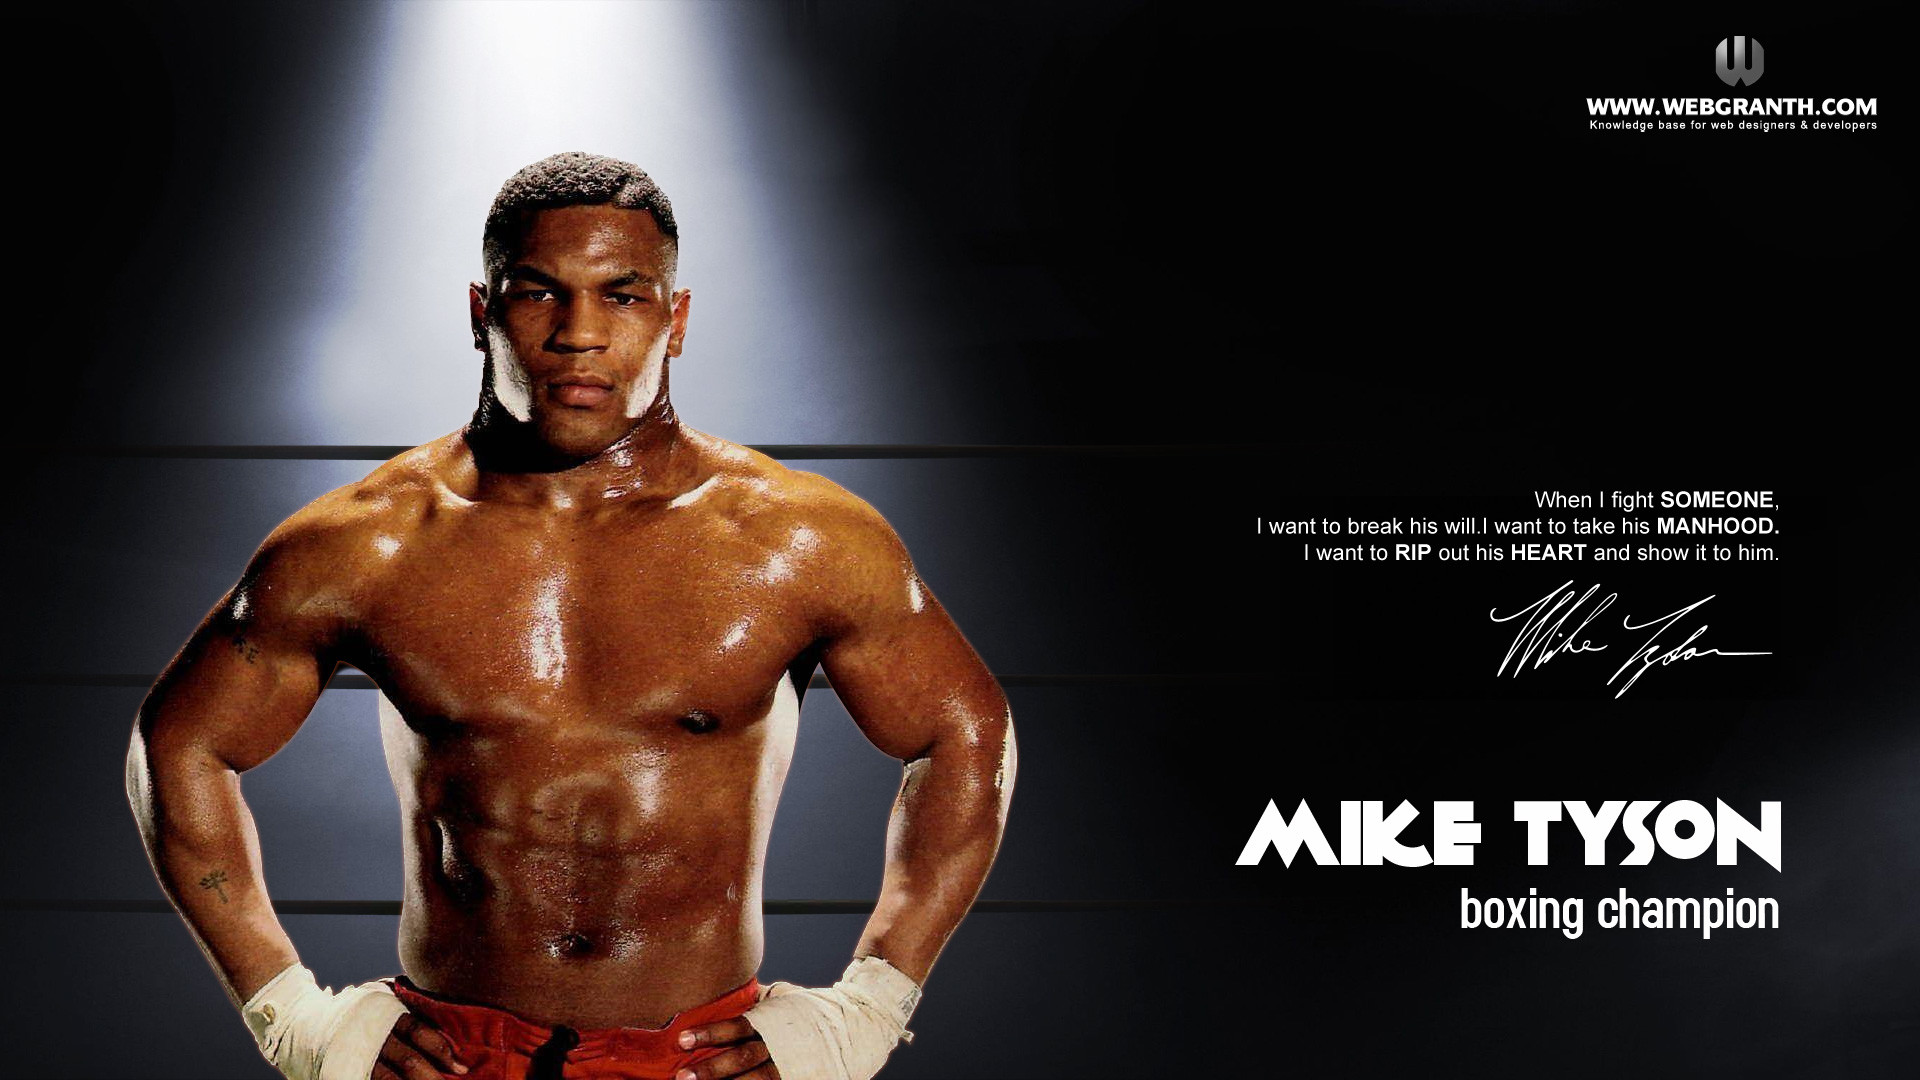 mike wallpaper,bodybuilder,barechested,bodybuilding,muscle,fitness professional